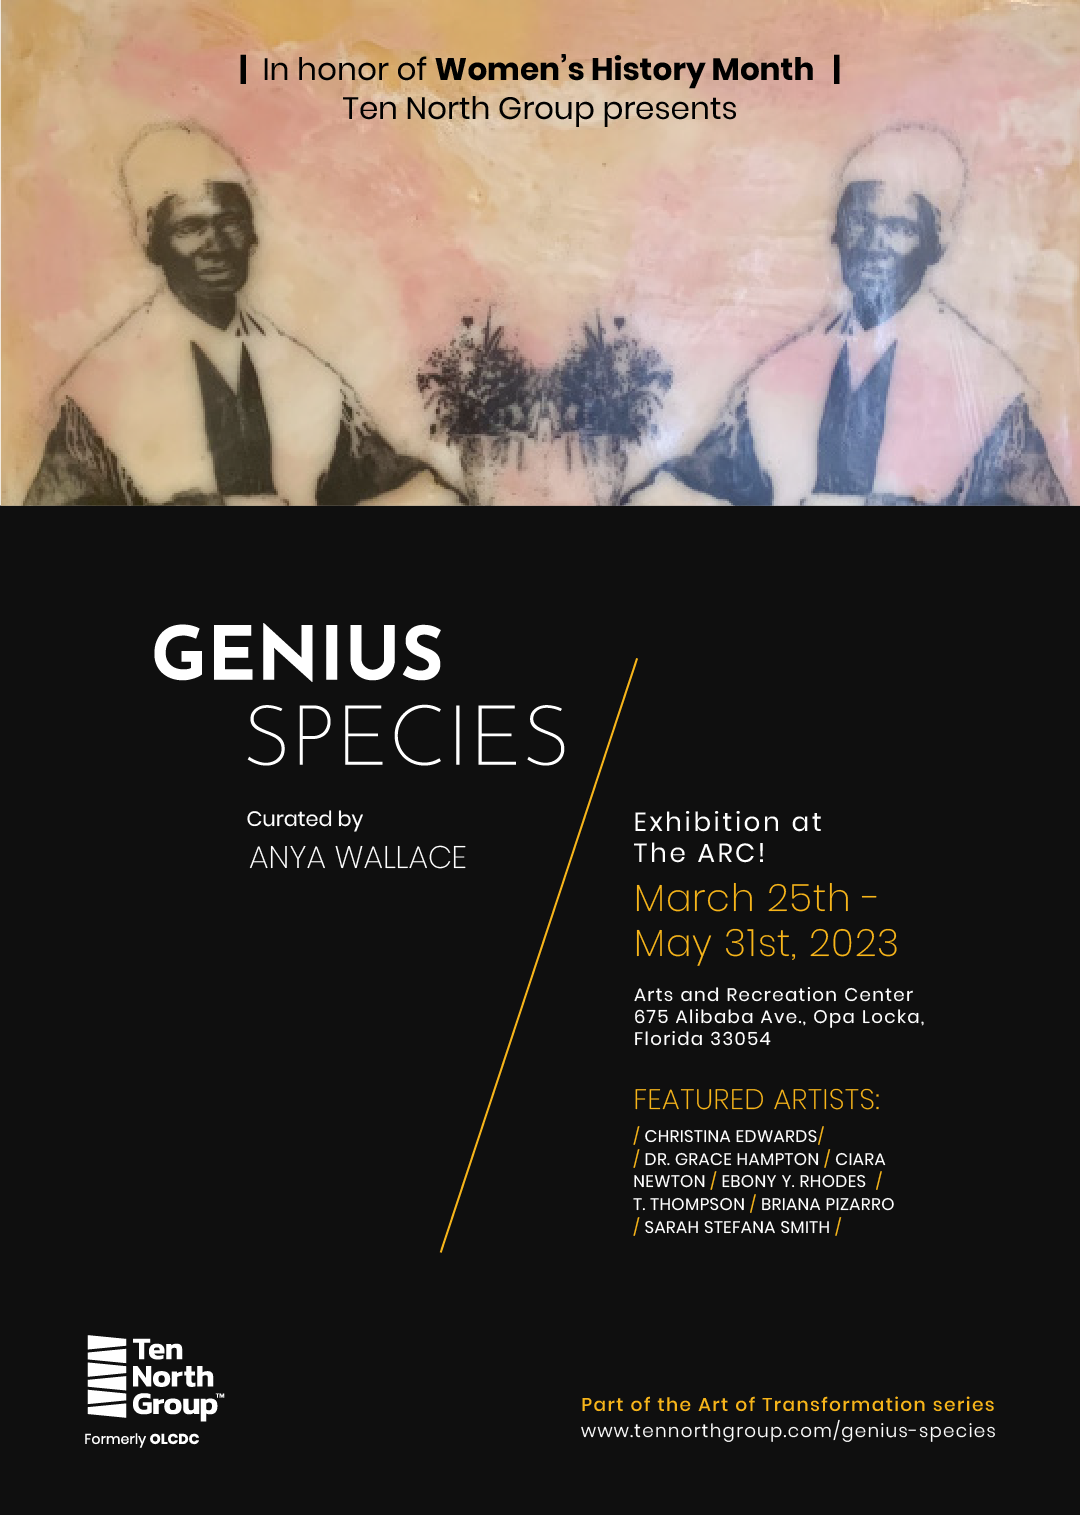 Genius Species group exhibition presented by Ten North Group (formerly Opa-locka Community Development Corporation)